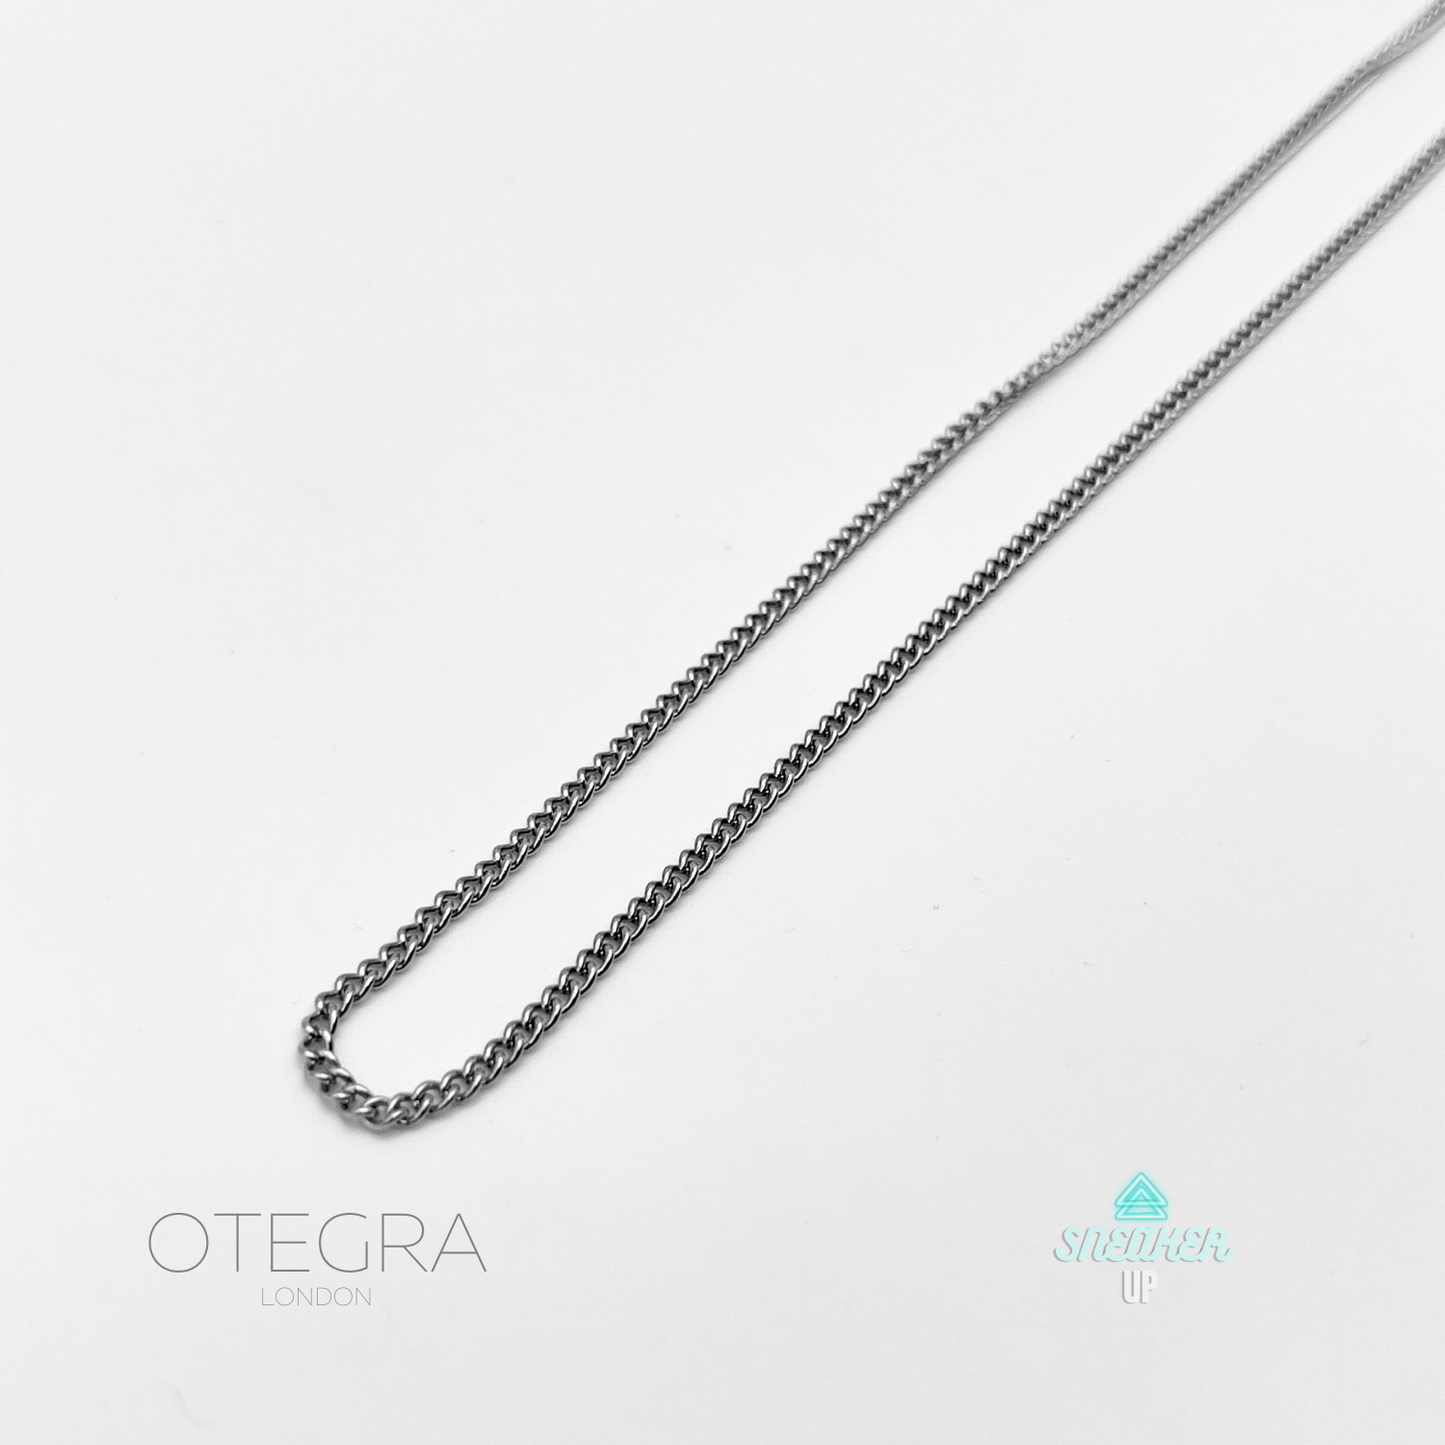 OTEGRA London 2.5mm Silver Chain Necklace